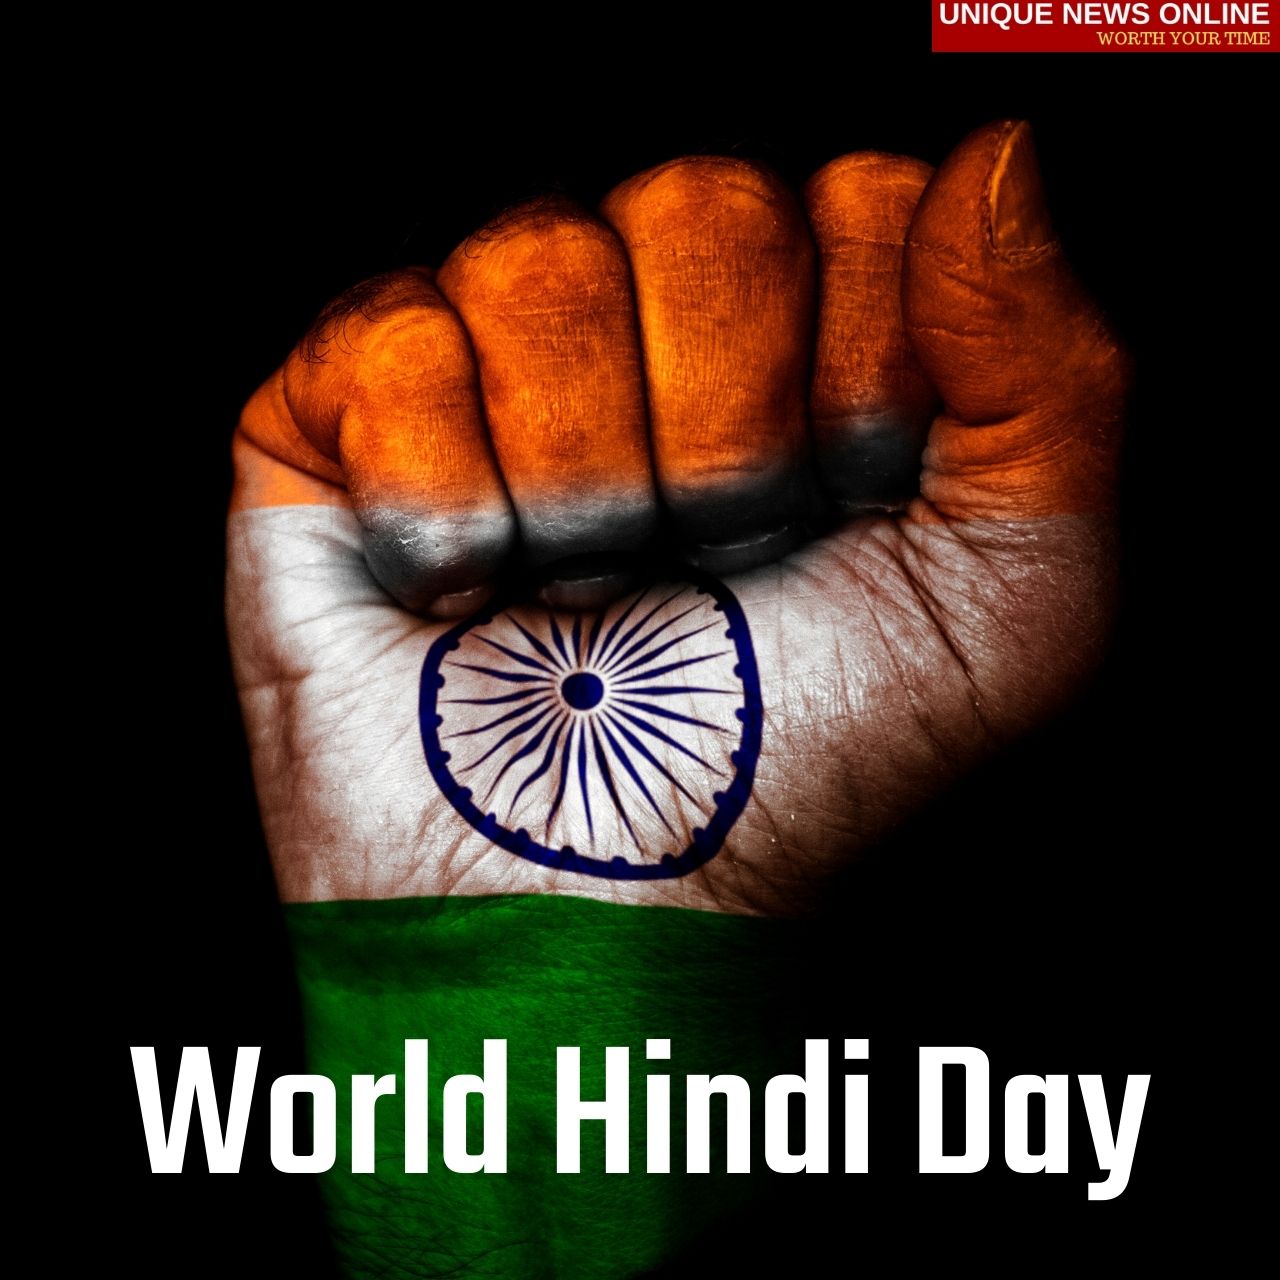 World Hindi Day 2022 WhatsApp Status Video Download to greet your loved ones